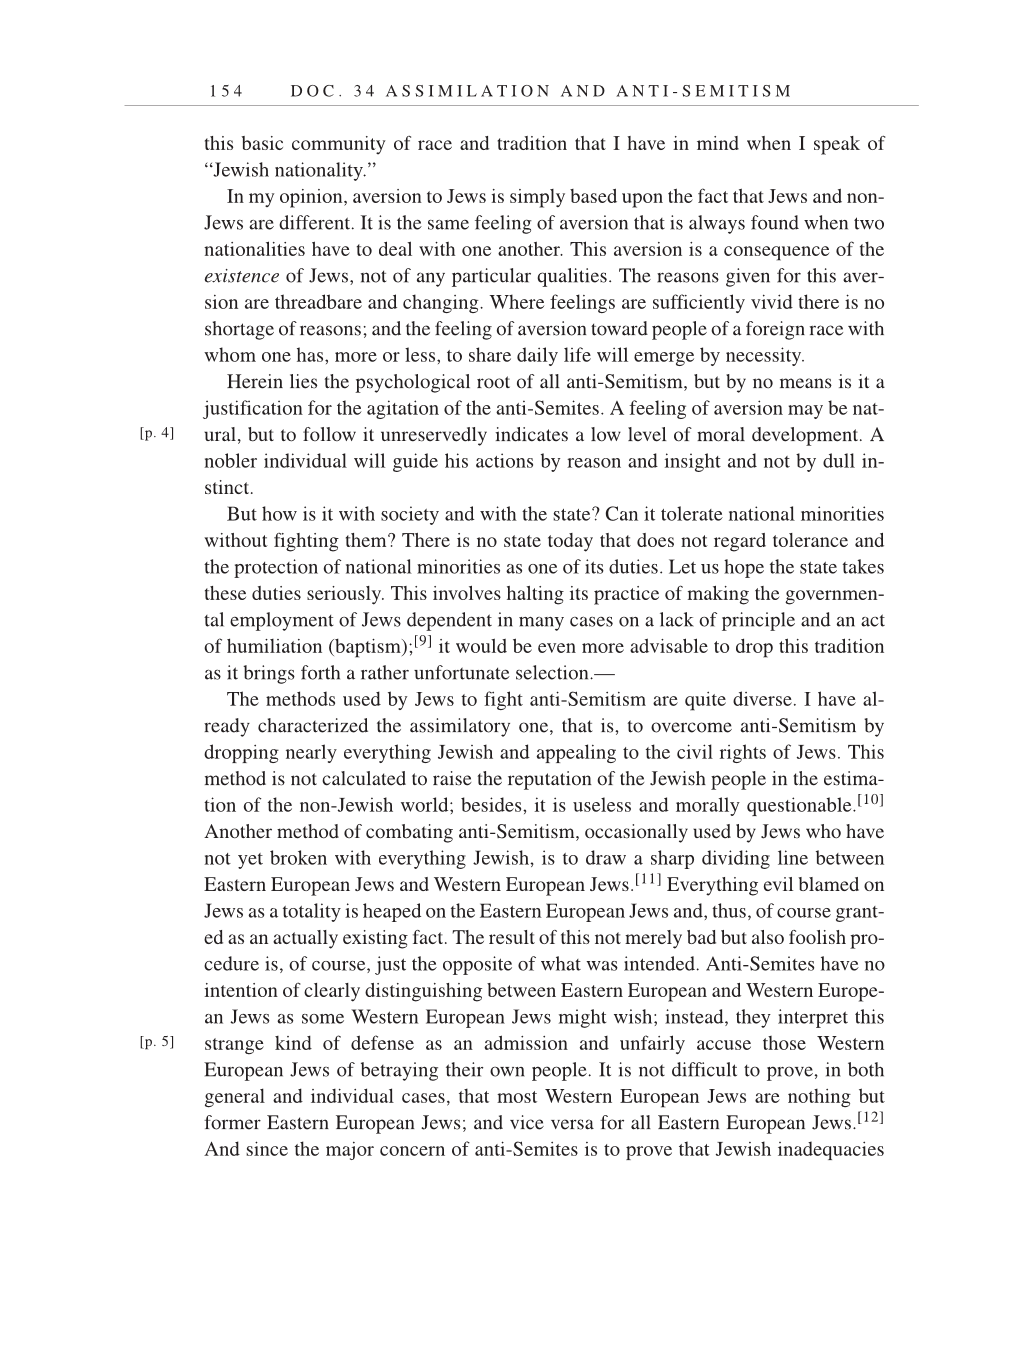 Volume 7: The Berlin Years: Writings, 1918-1921 (English translation supplement) page 154